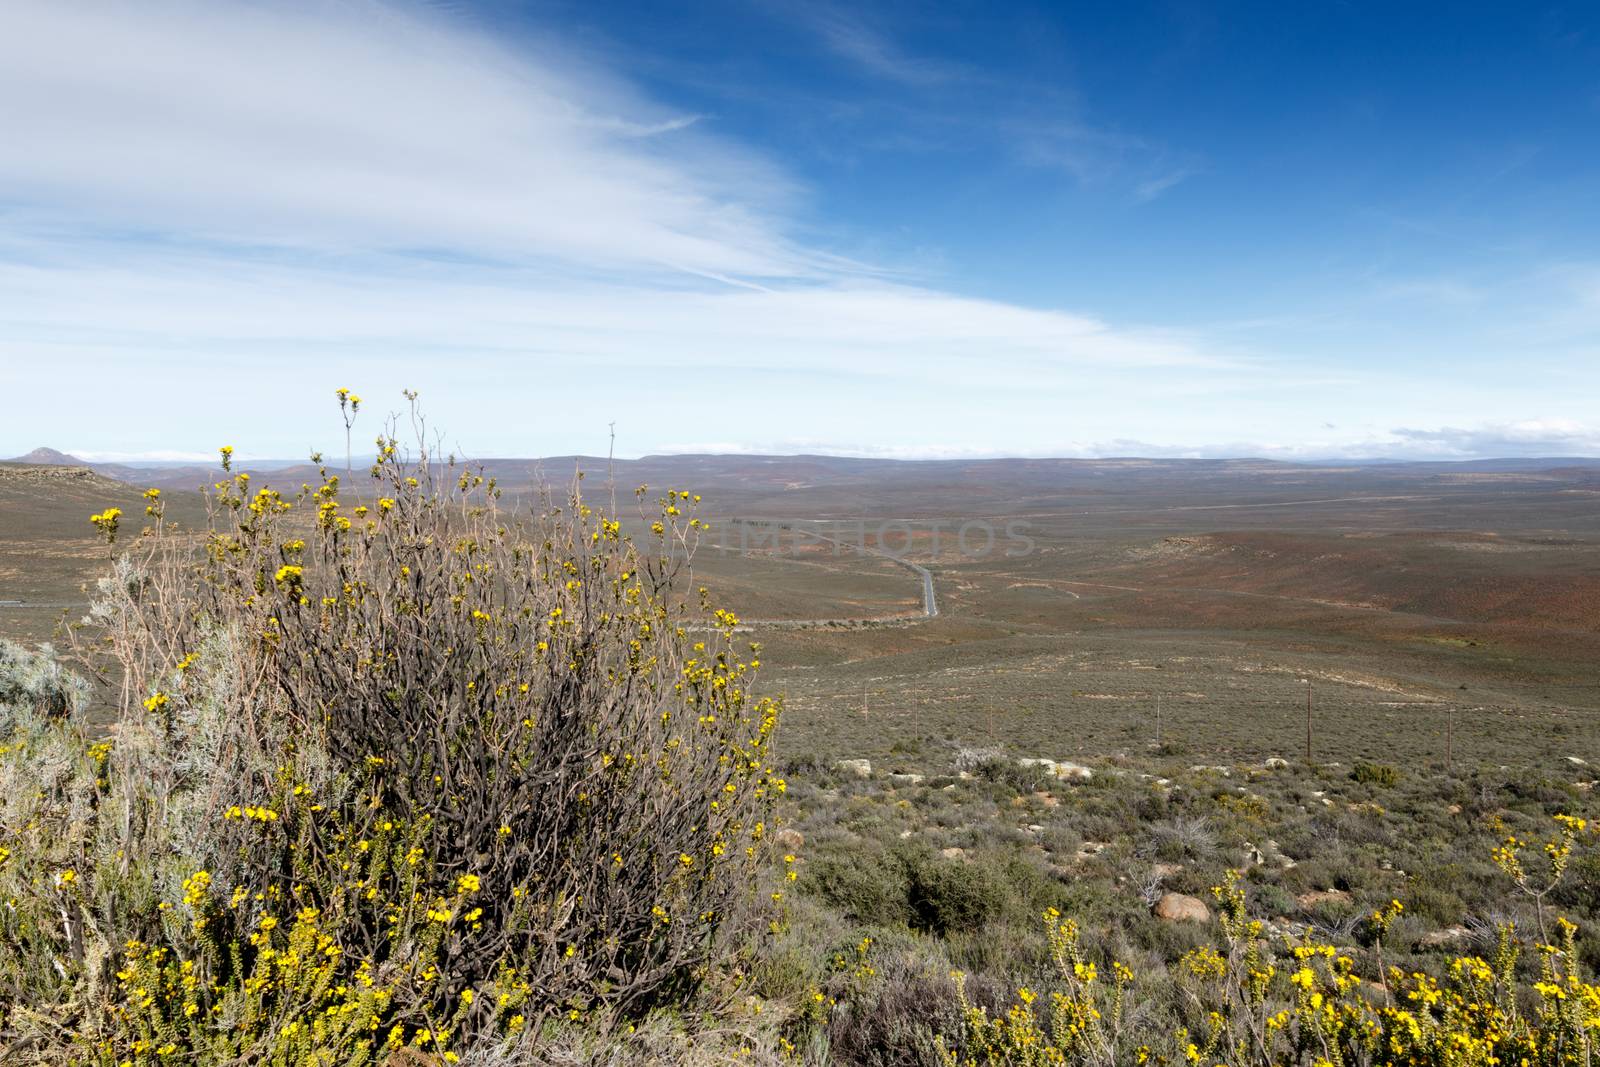 Yellow in a field of nothing - Sutherland is a town with about 2,841 inhabitants in the Northern Cape province of South Africa. It lies in the western Roggeveld Mountains in the Karoo